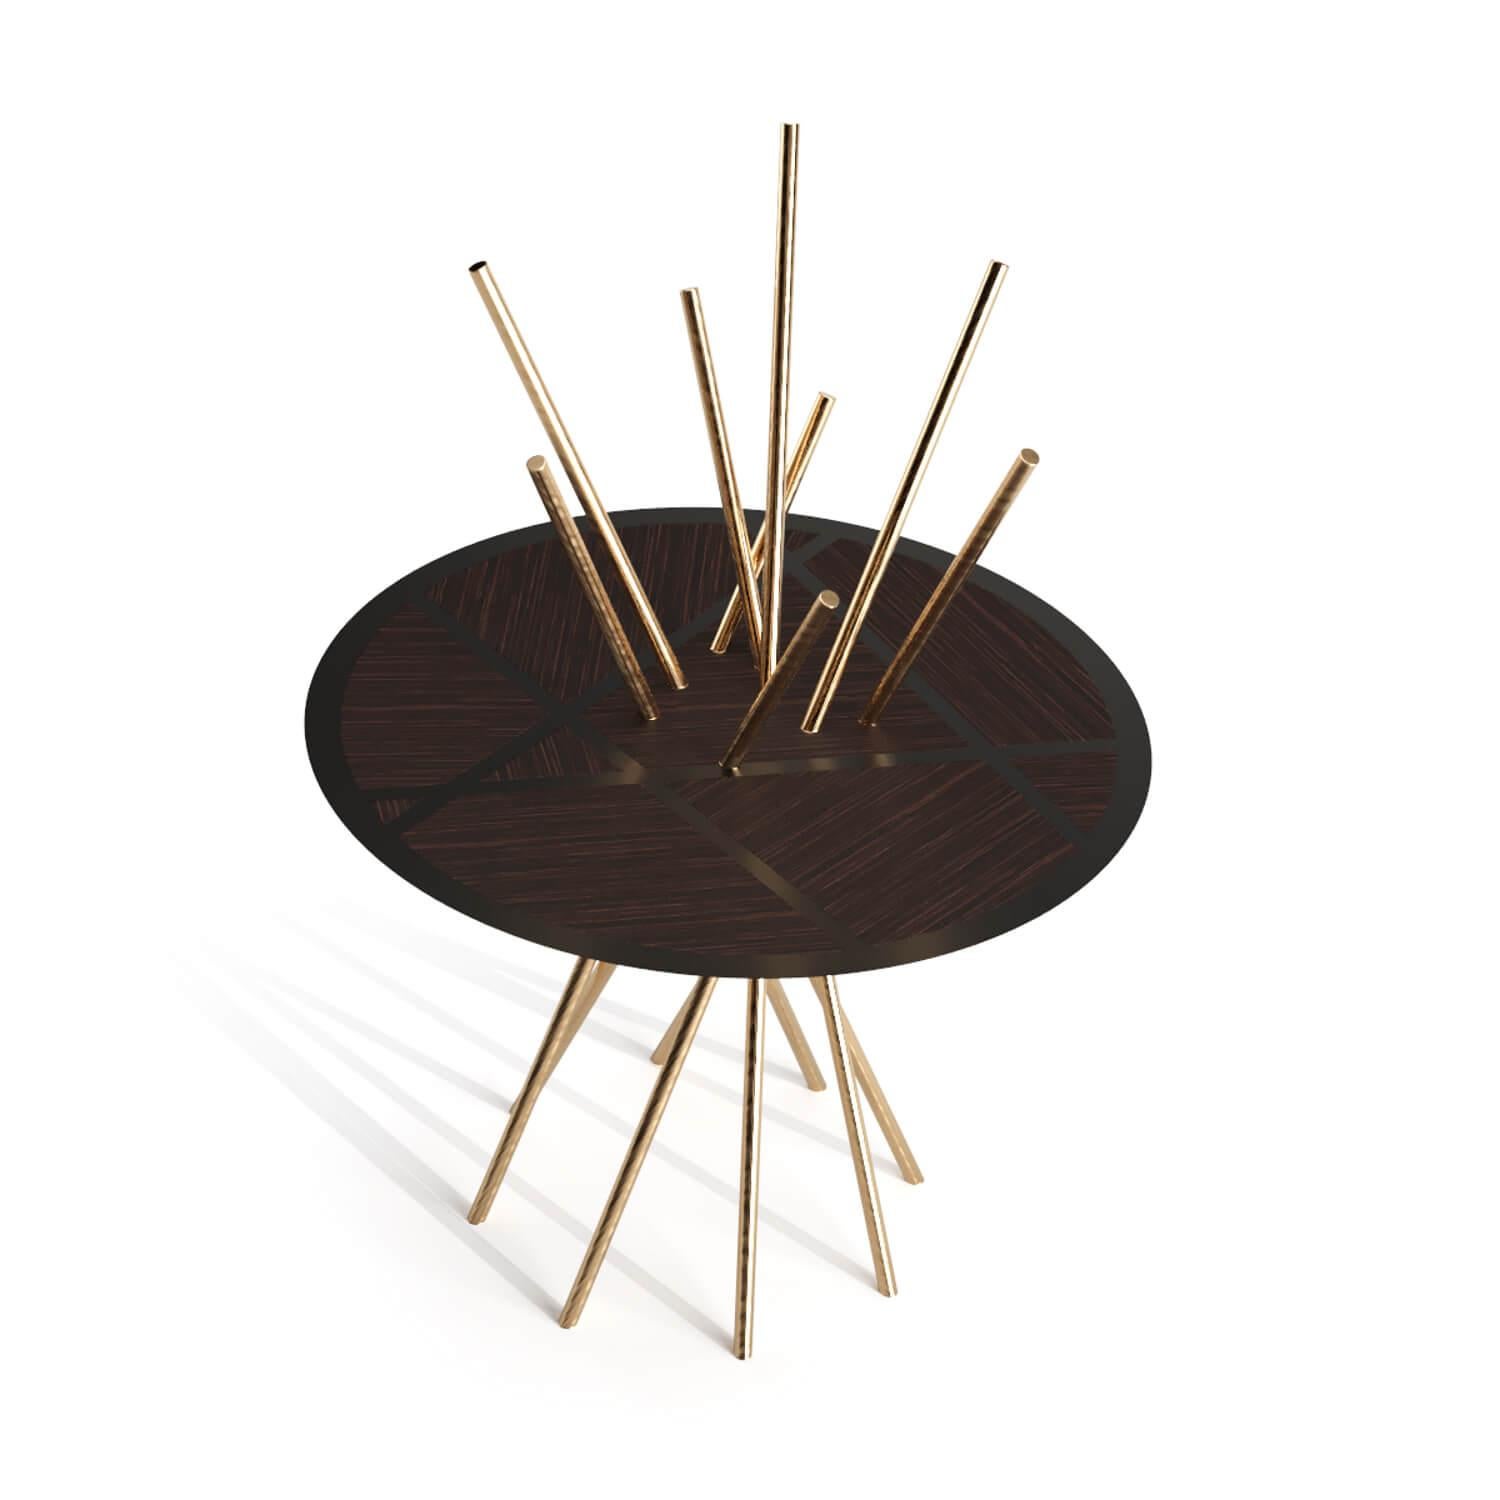 Portuguese Modern Round Pedestal Table Ebony Macassar Wood Black Lacquer Brushed Brass For Sale